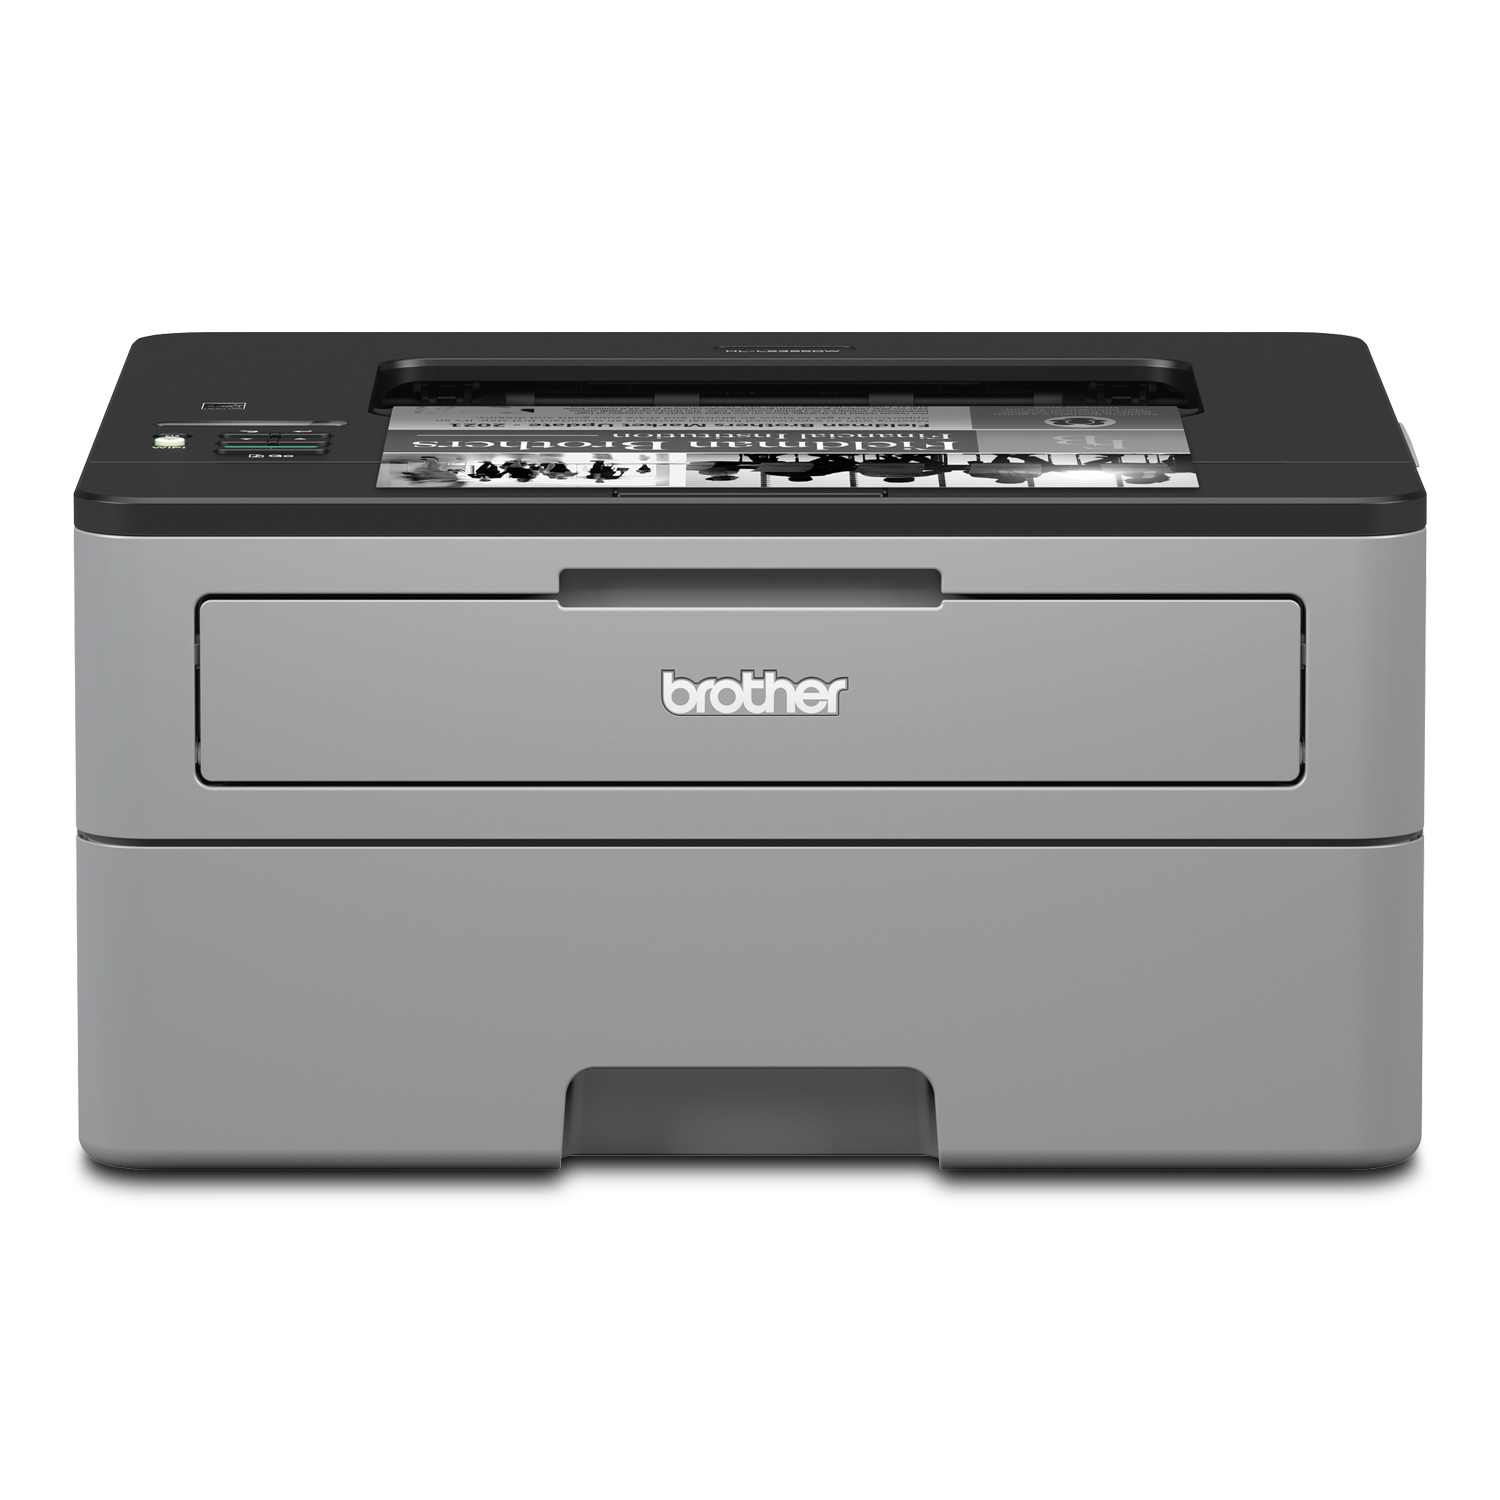 Brother HL-L2325DW Monochrome Laser Printer, Wireless Networking, Duplex Printing - image 1 of 8